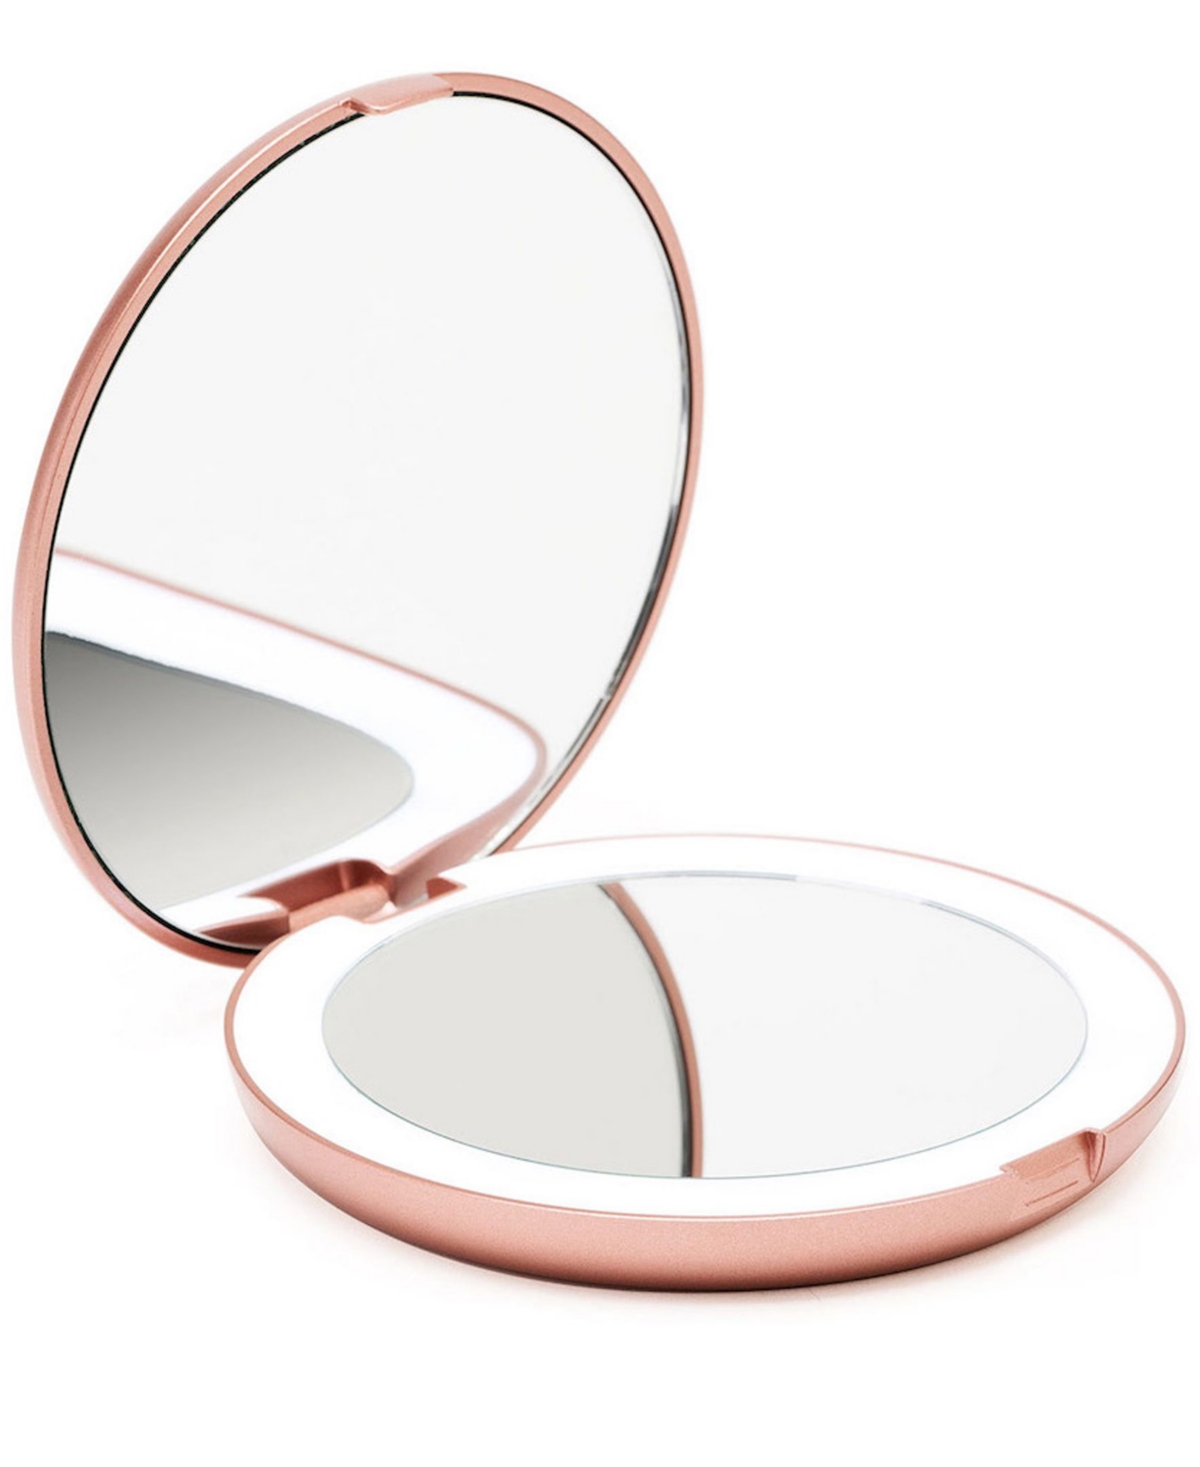 Fancii Lumi 5" Compact Mirror with Led Lights